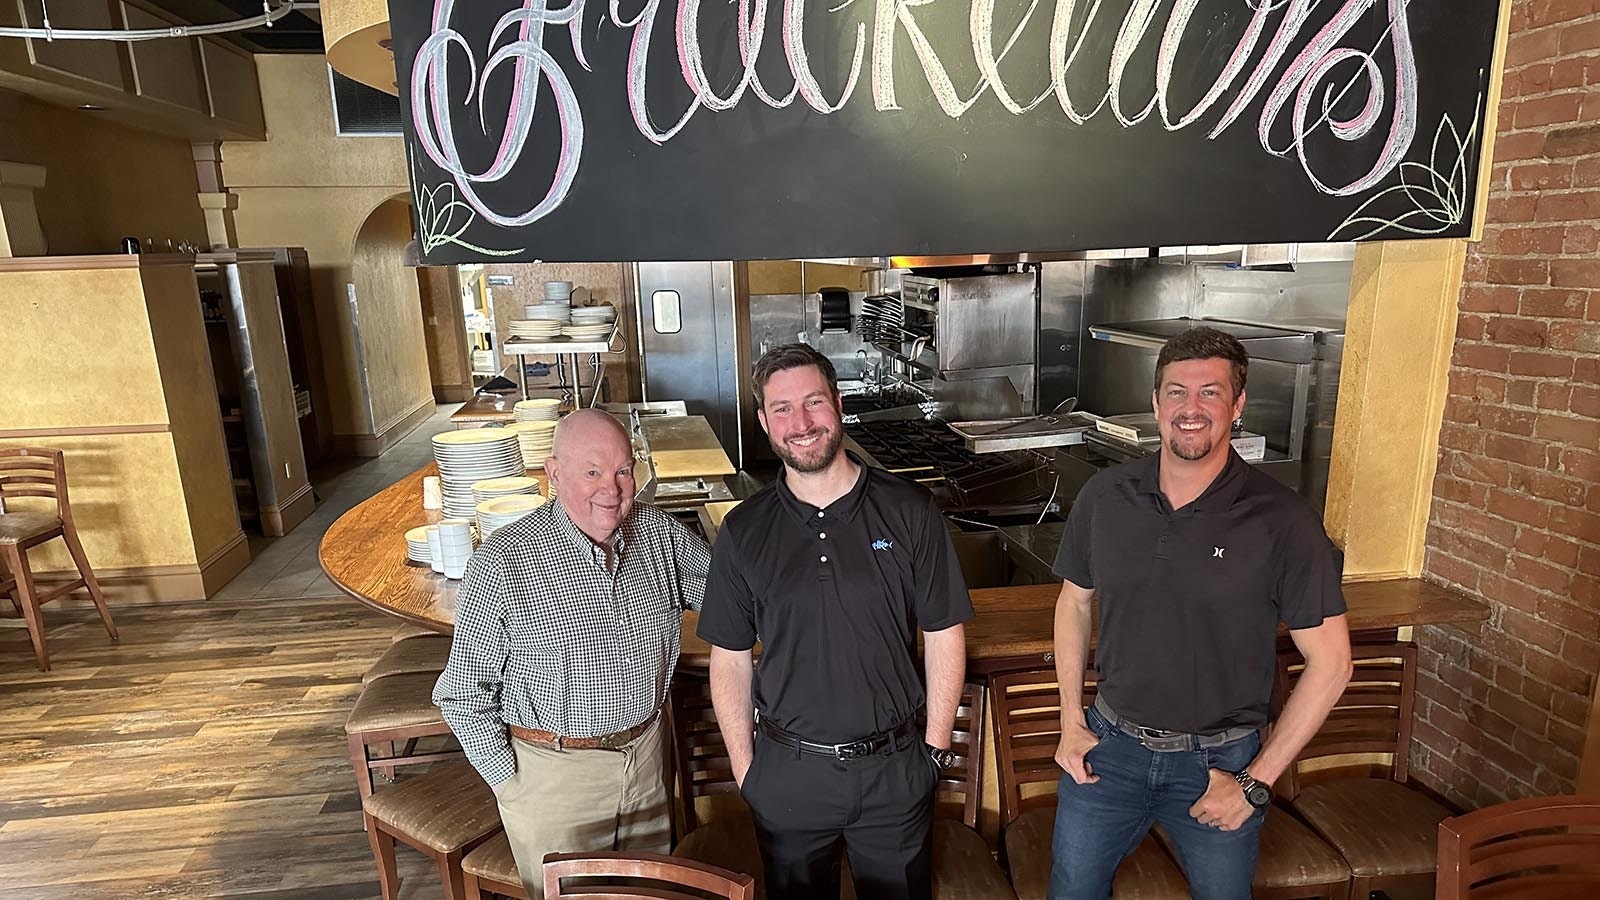 Co-owner Kim Love, from left, general manager Tim Kerr and Ryan Winner, another co-owner of Frackelton's Fine Food & Spirits in Sheridan. Not pictured is co-owner Tanner Beemer.